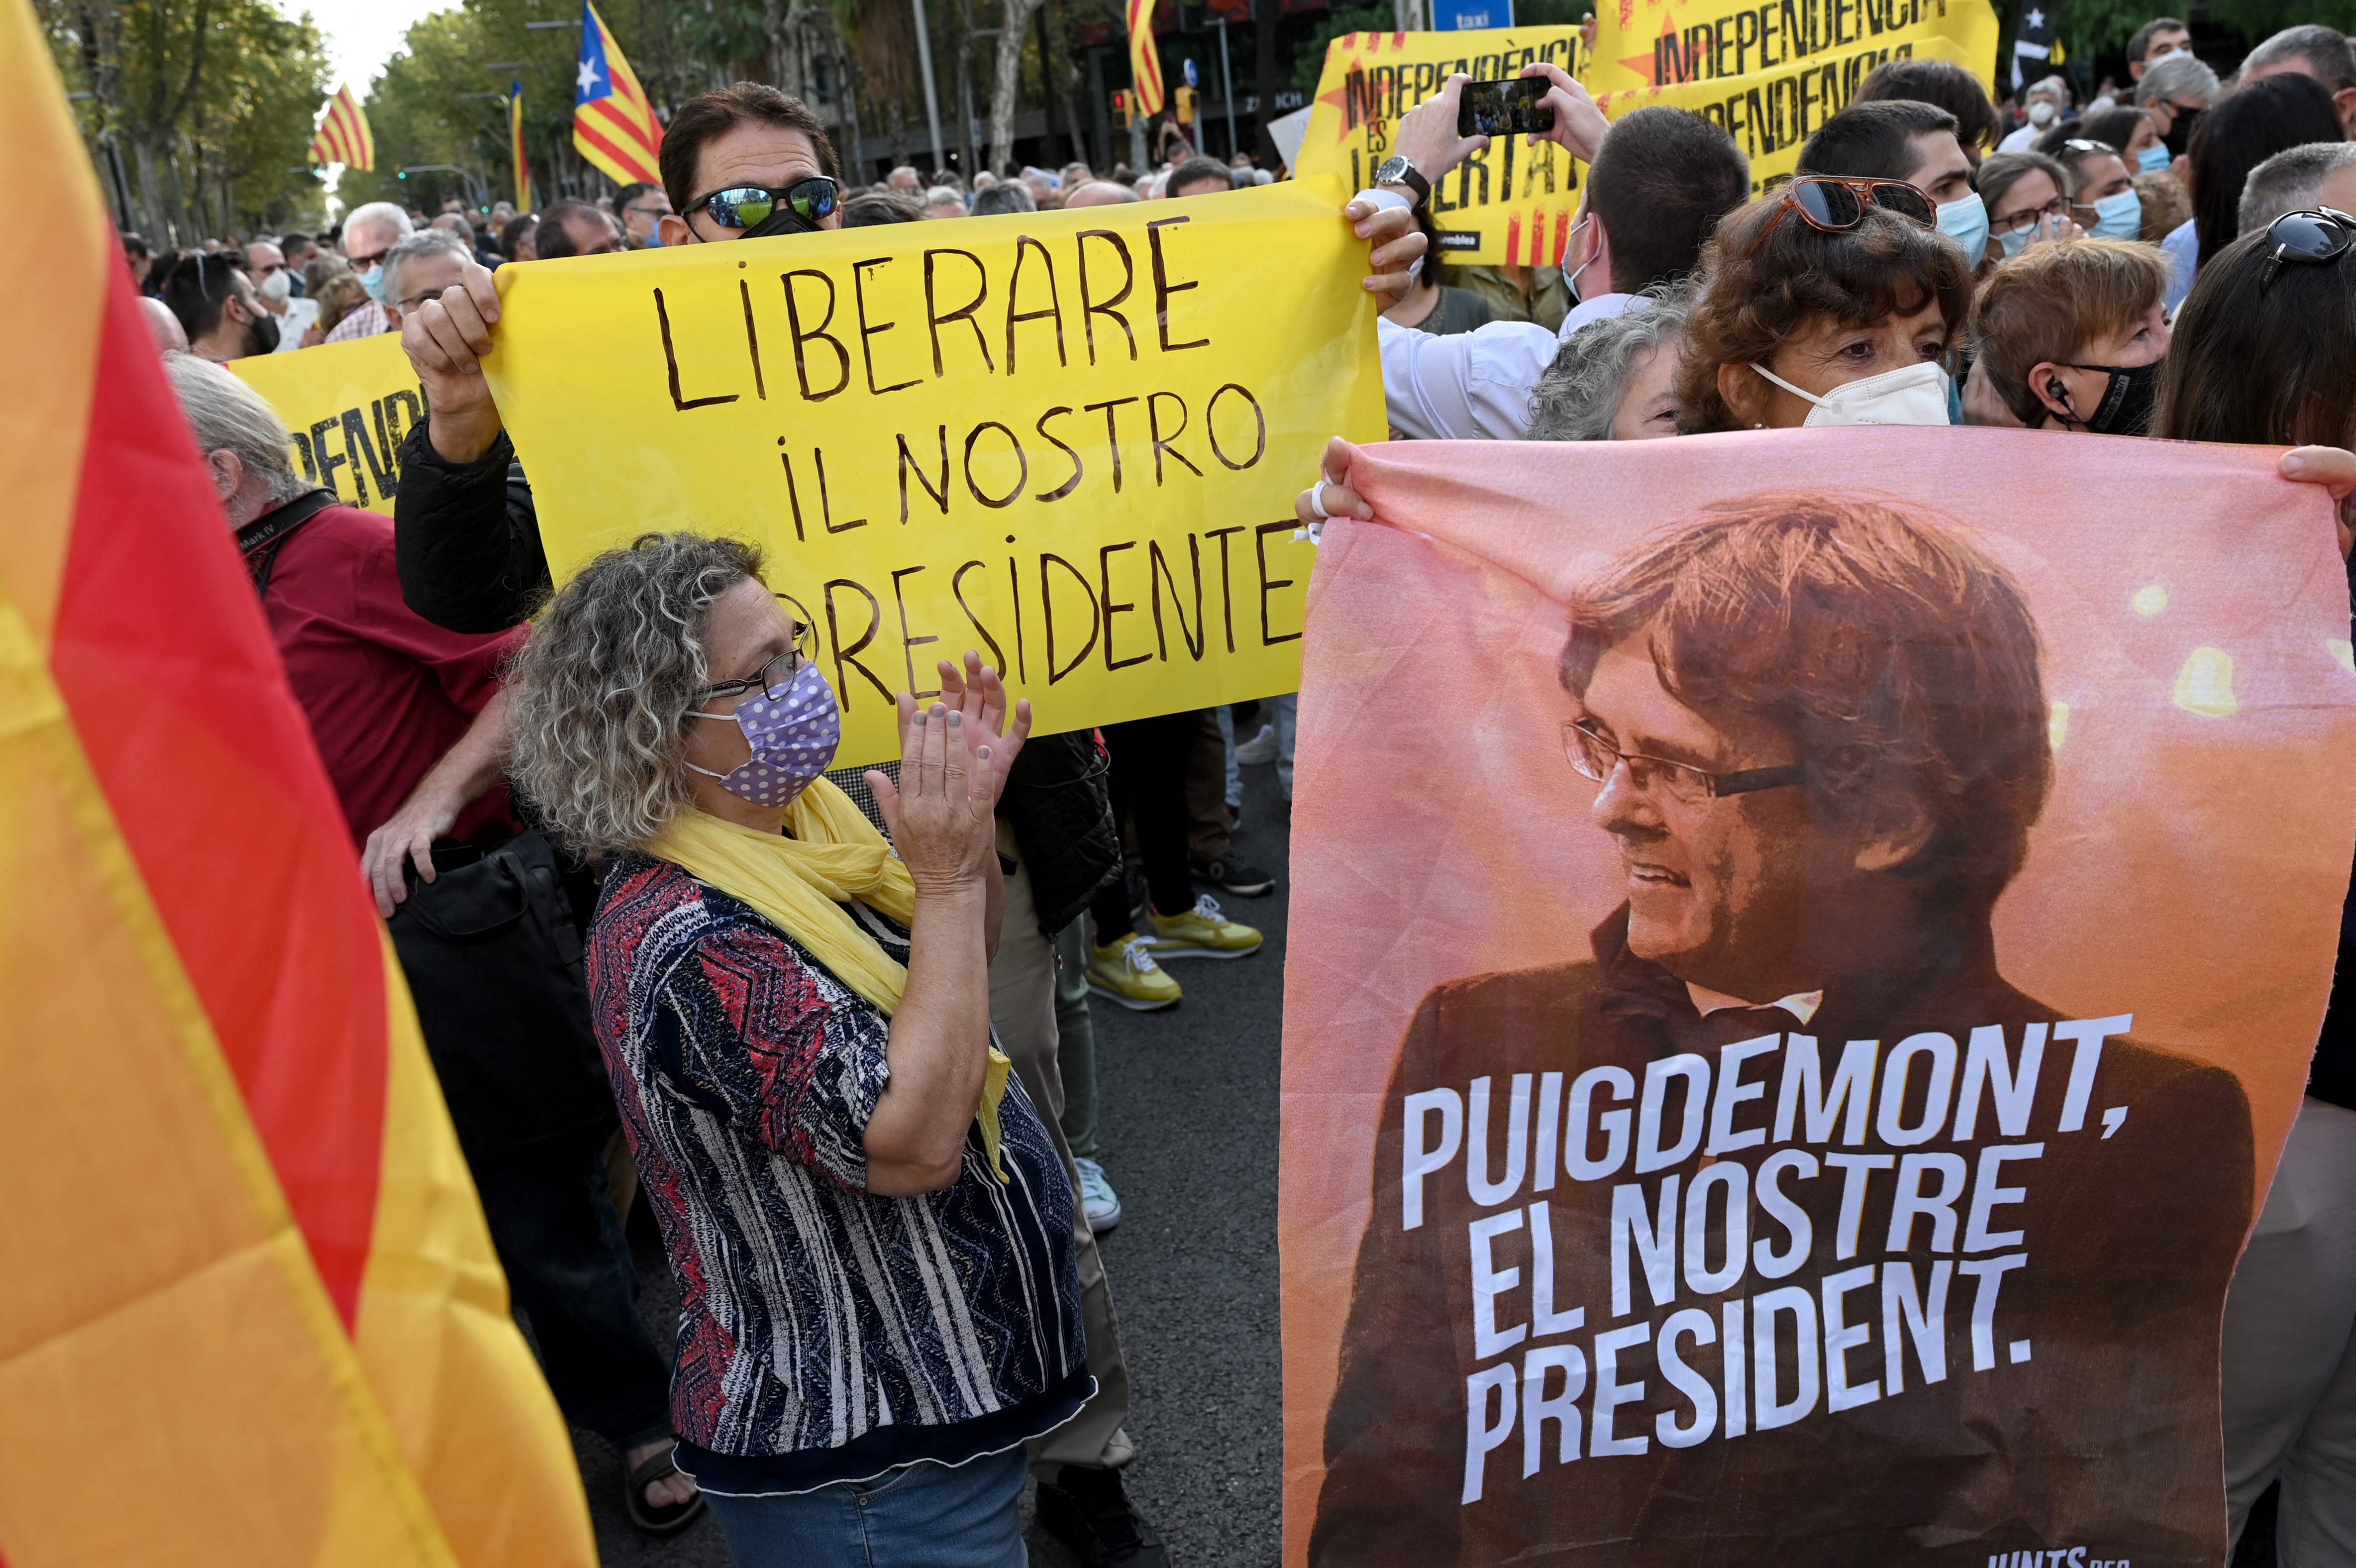 Demonstration outside Italian consulate in Barcelona after arrest of exiled former Catalan president Carles Puigdemont in Italy